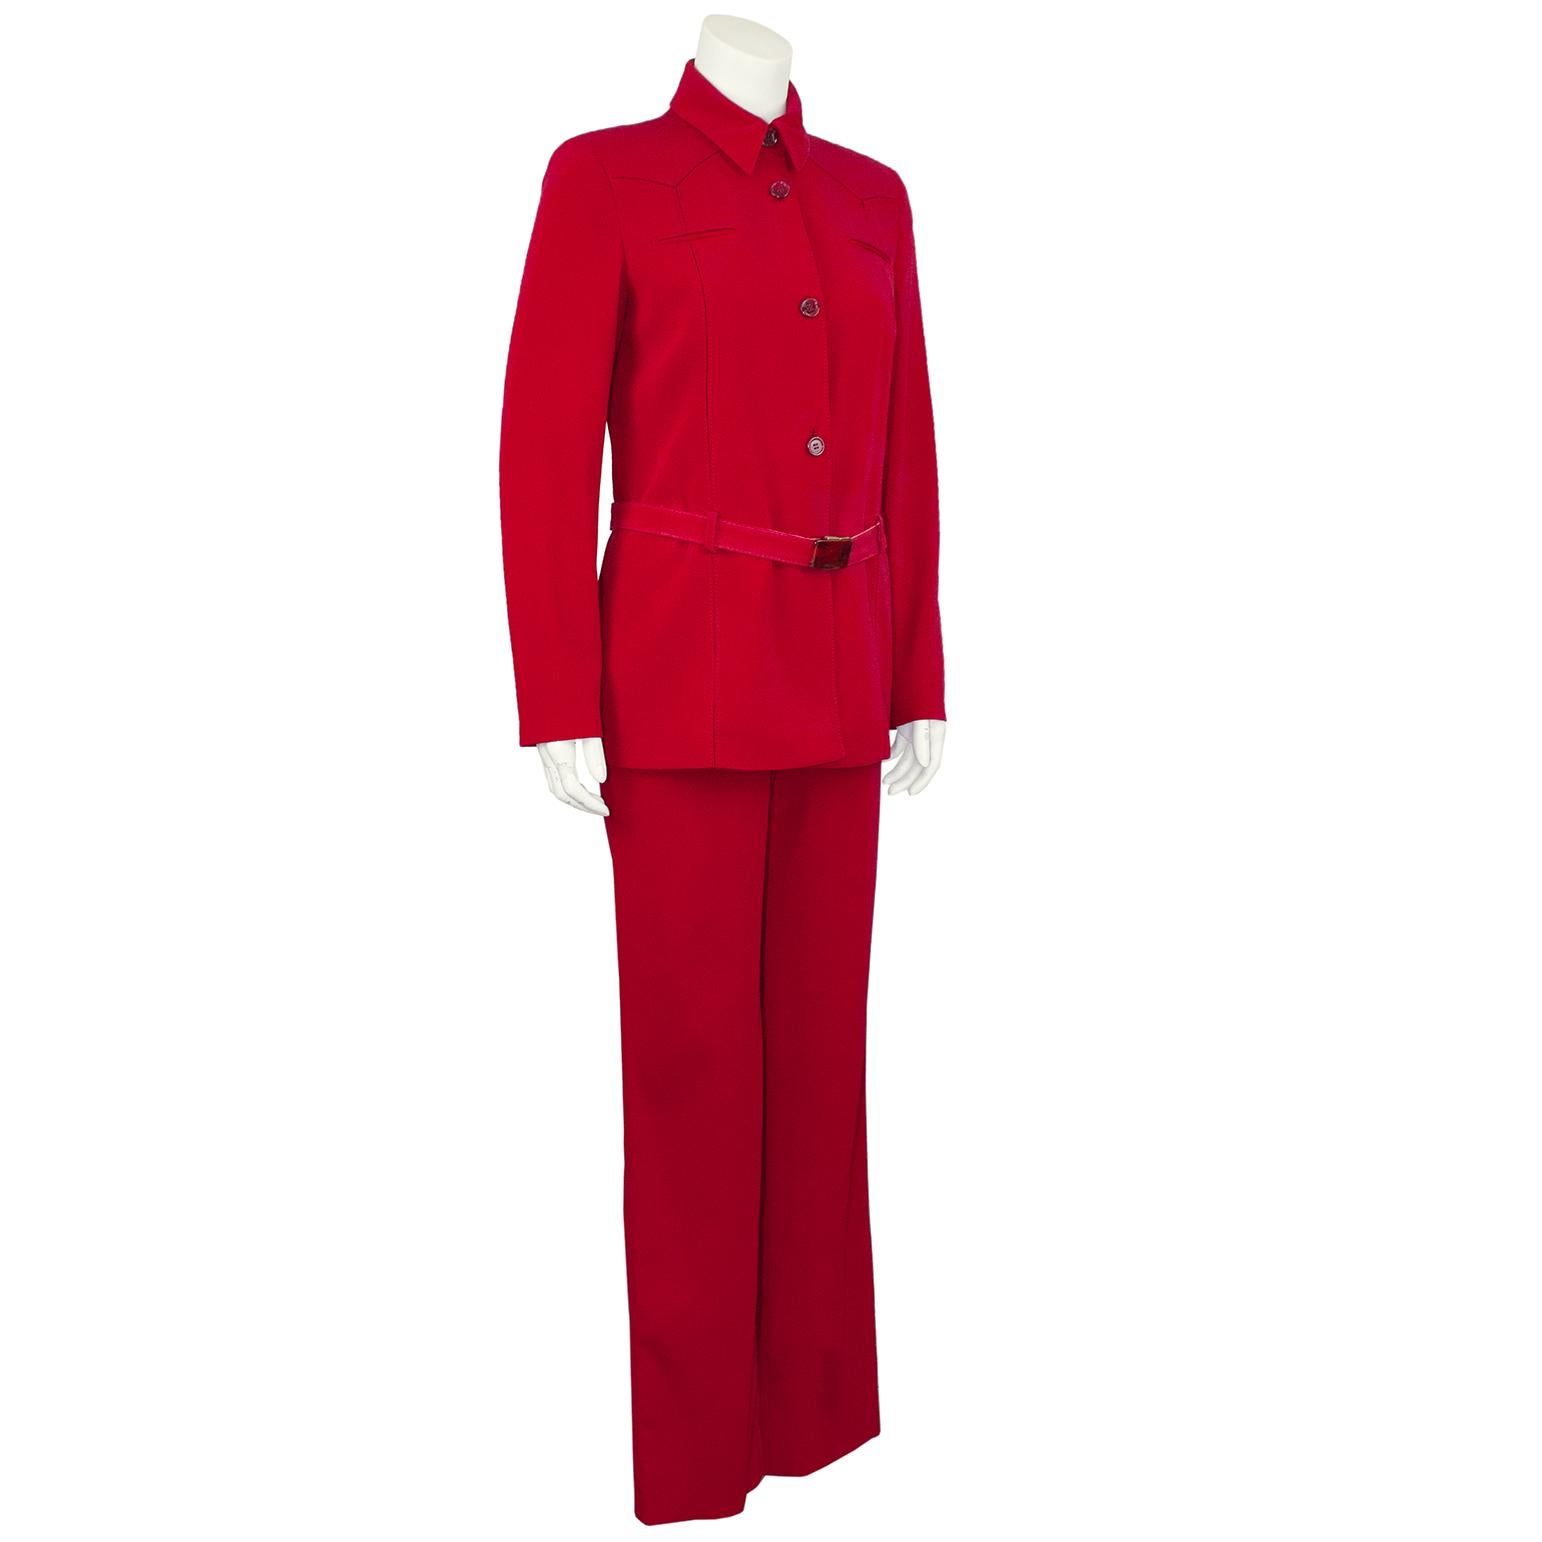 Iconic Prada red suit from the late 1990s. The Western style yoke detail on the jacket adds a touch of charm and it fastens with buttons down the front and a matching belt. The belt is secured to the waist with red belt loops and the buckle features